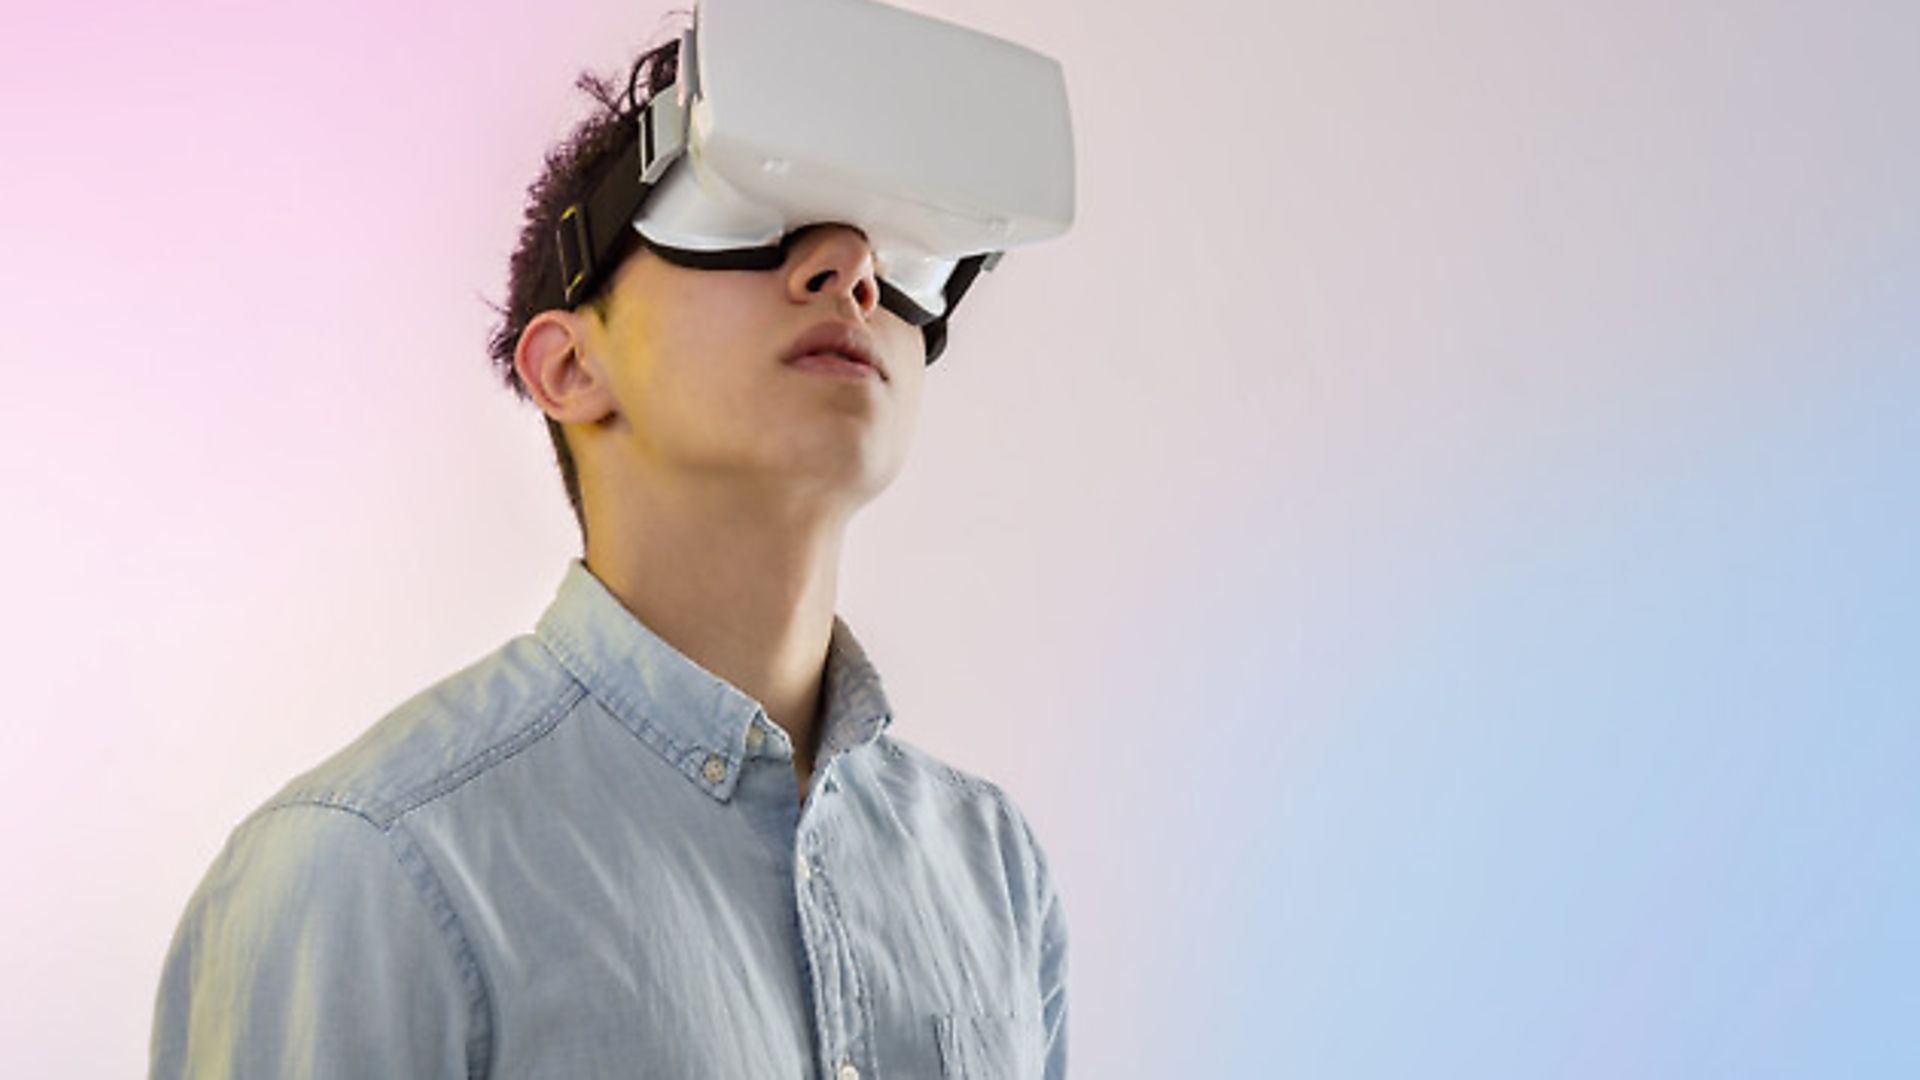 Young man wearing virtual reality headset looking up - Credit: Getty Images/Cultura RF